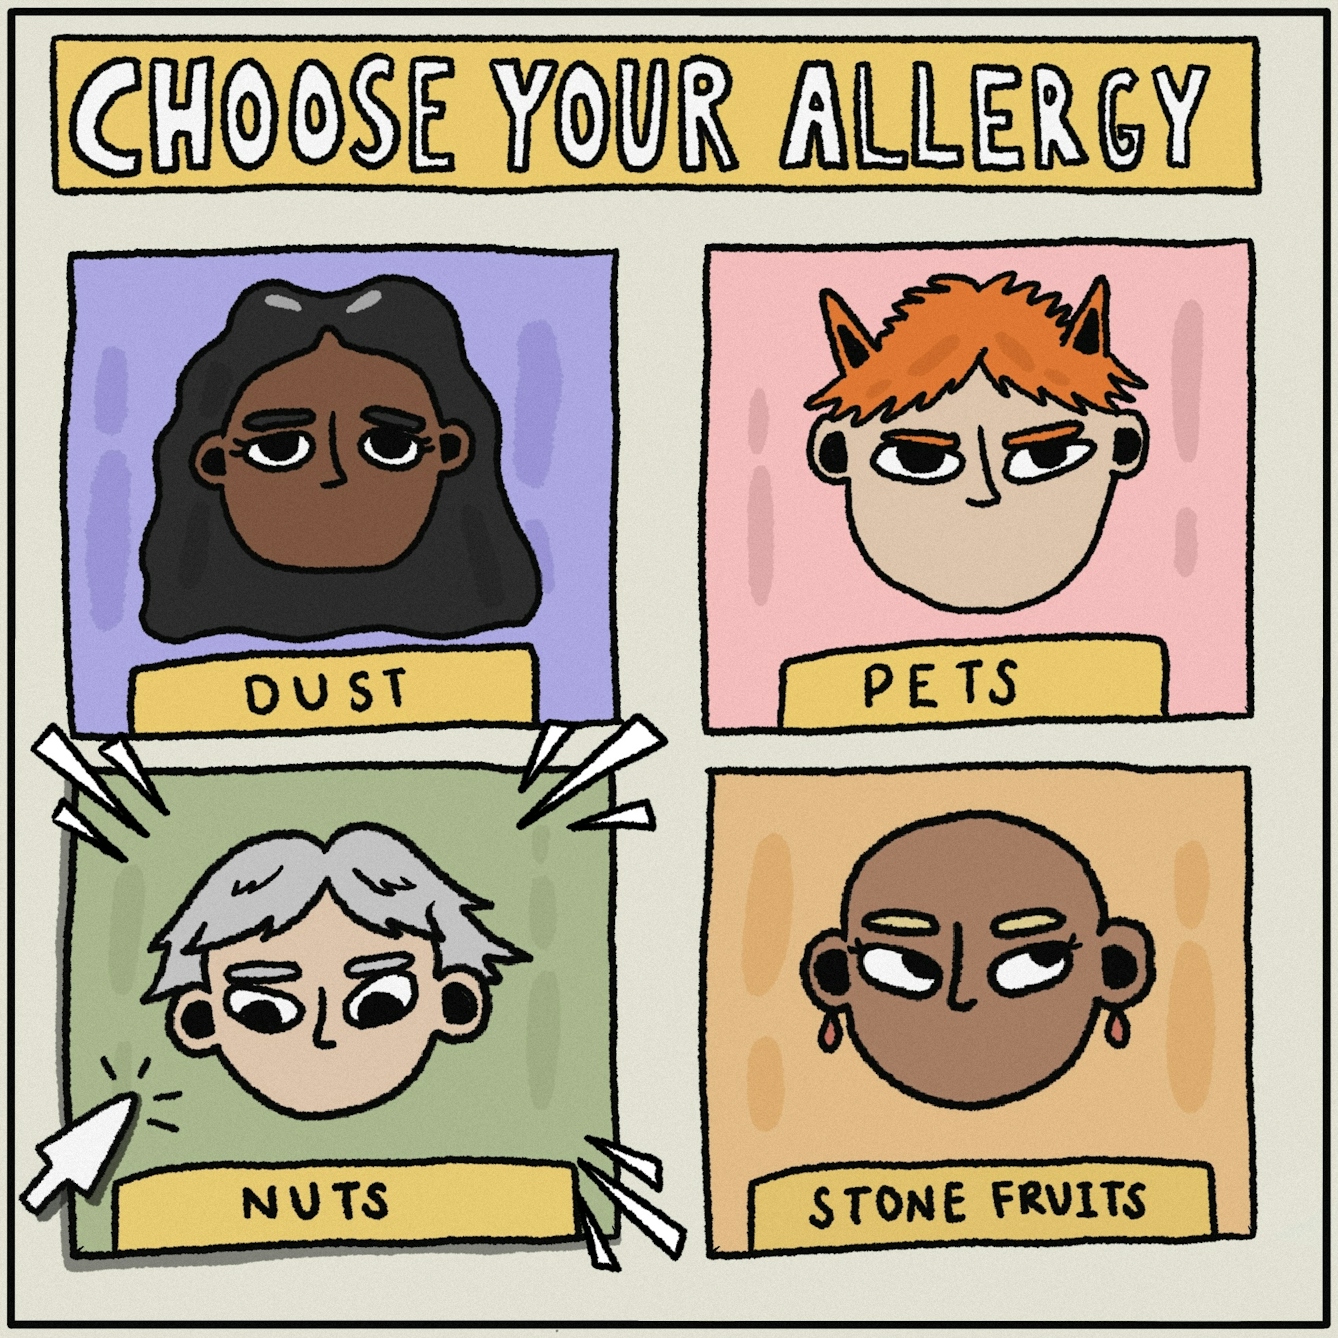 Panel 1 of a digitally drawn, four-panel comic titled ‘Ragequit’. The text at the top reads “CHOOSE YOUR ALLERGY”. The box in the bottom left is labelled ‘NUTS’ and, in it, is a character with grey hair and grey eyebrows. A cartoon cursor is clicking over this box to signal this is the allergy you have chosen. 